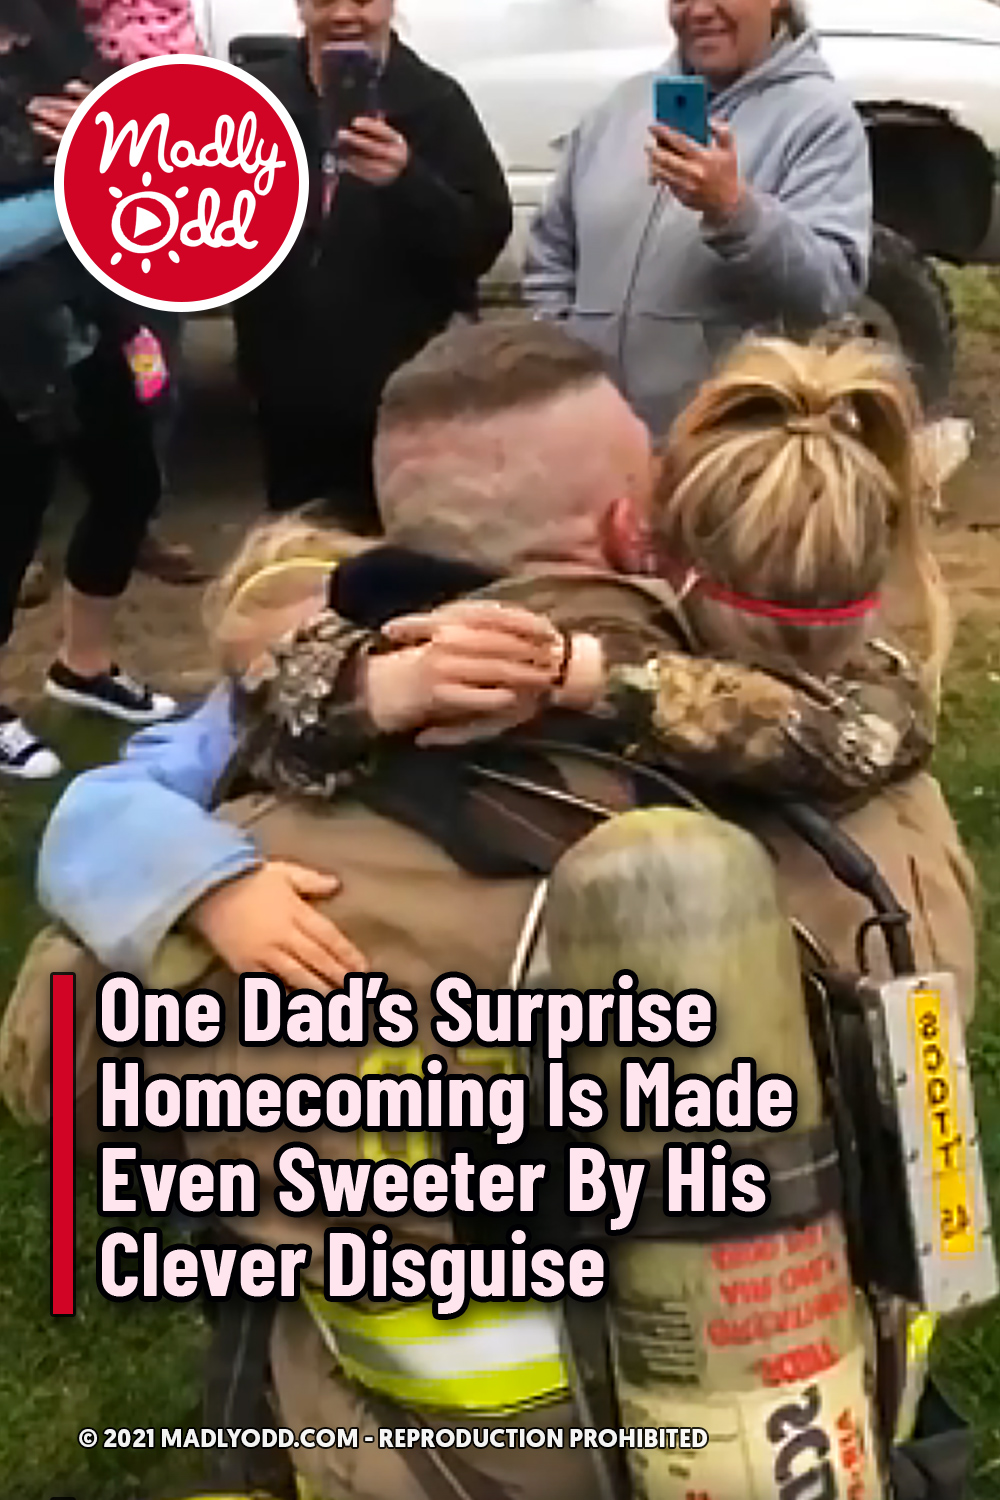 One Dad’s Surprise Homecoming Is Made Even Sweeter By His Clever Disguise